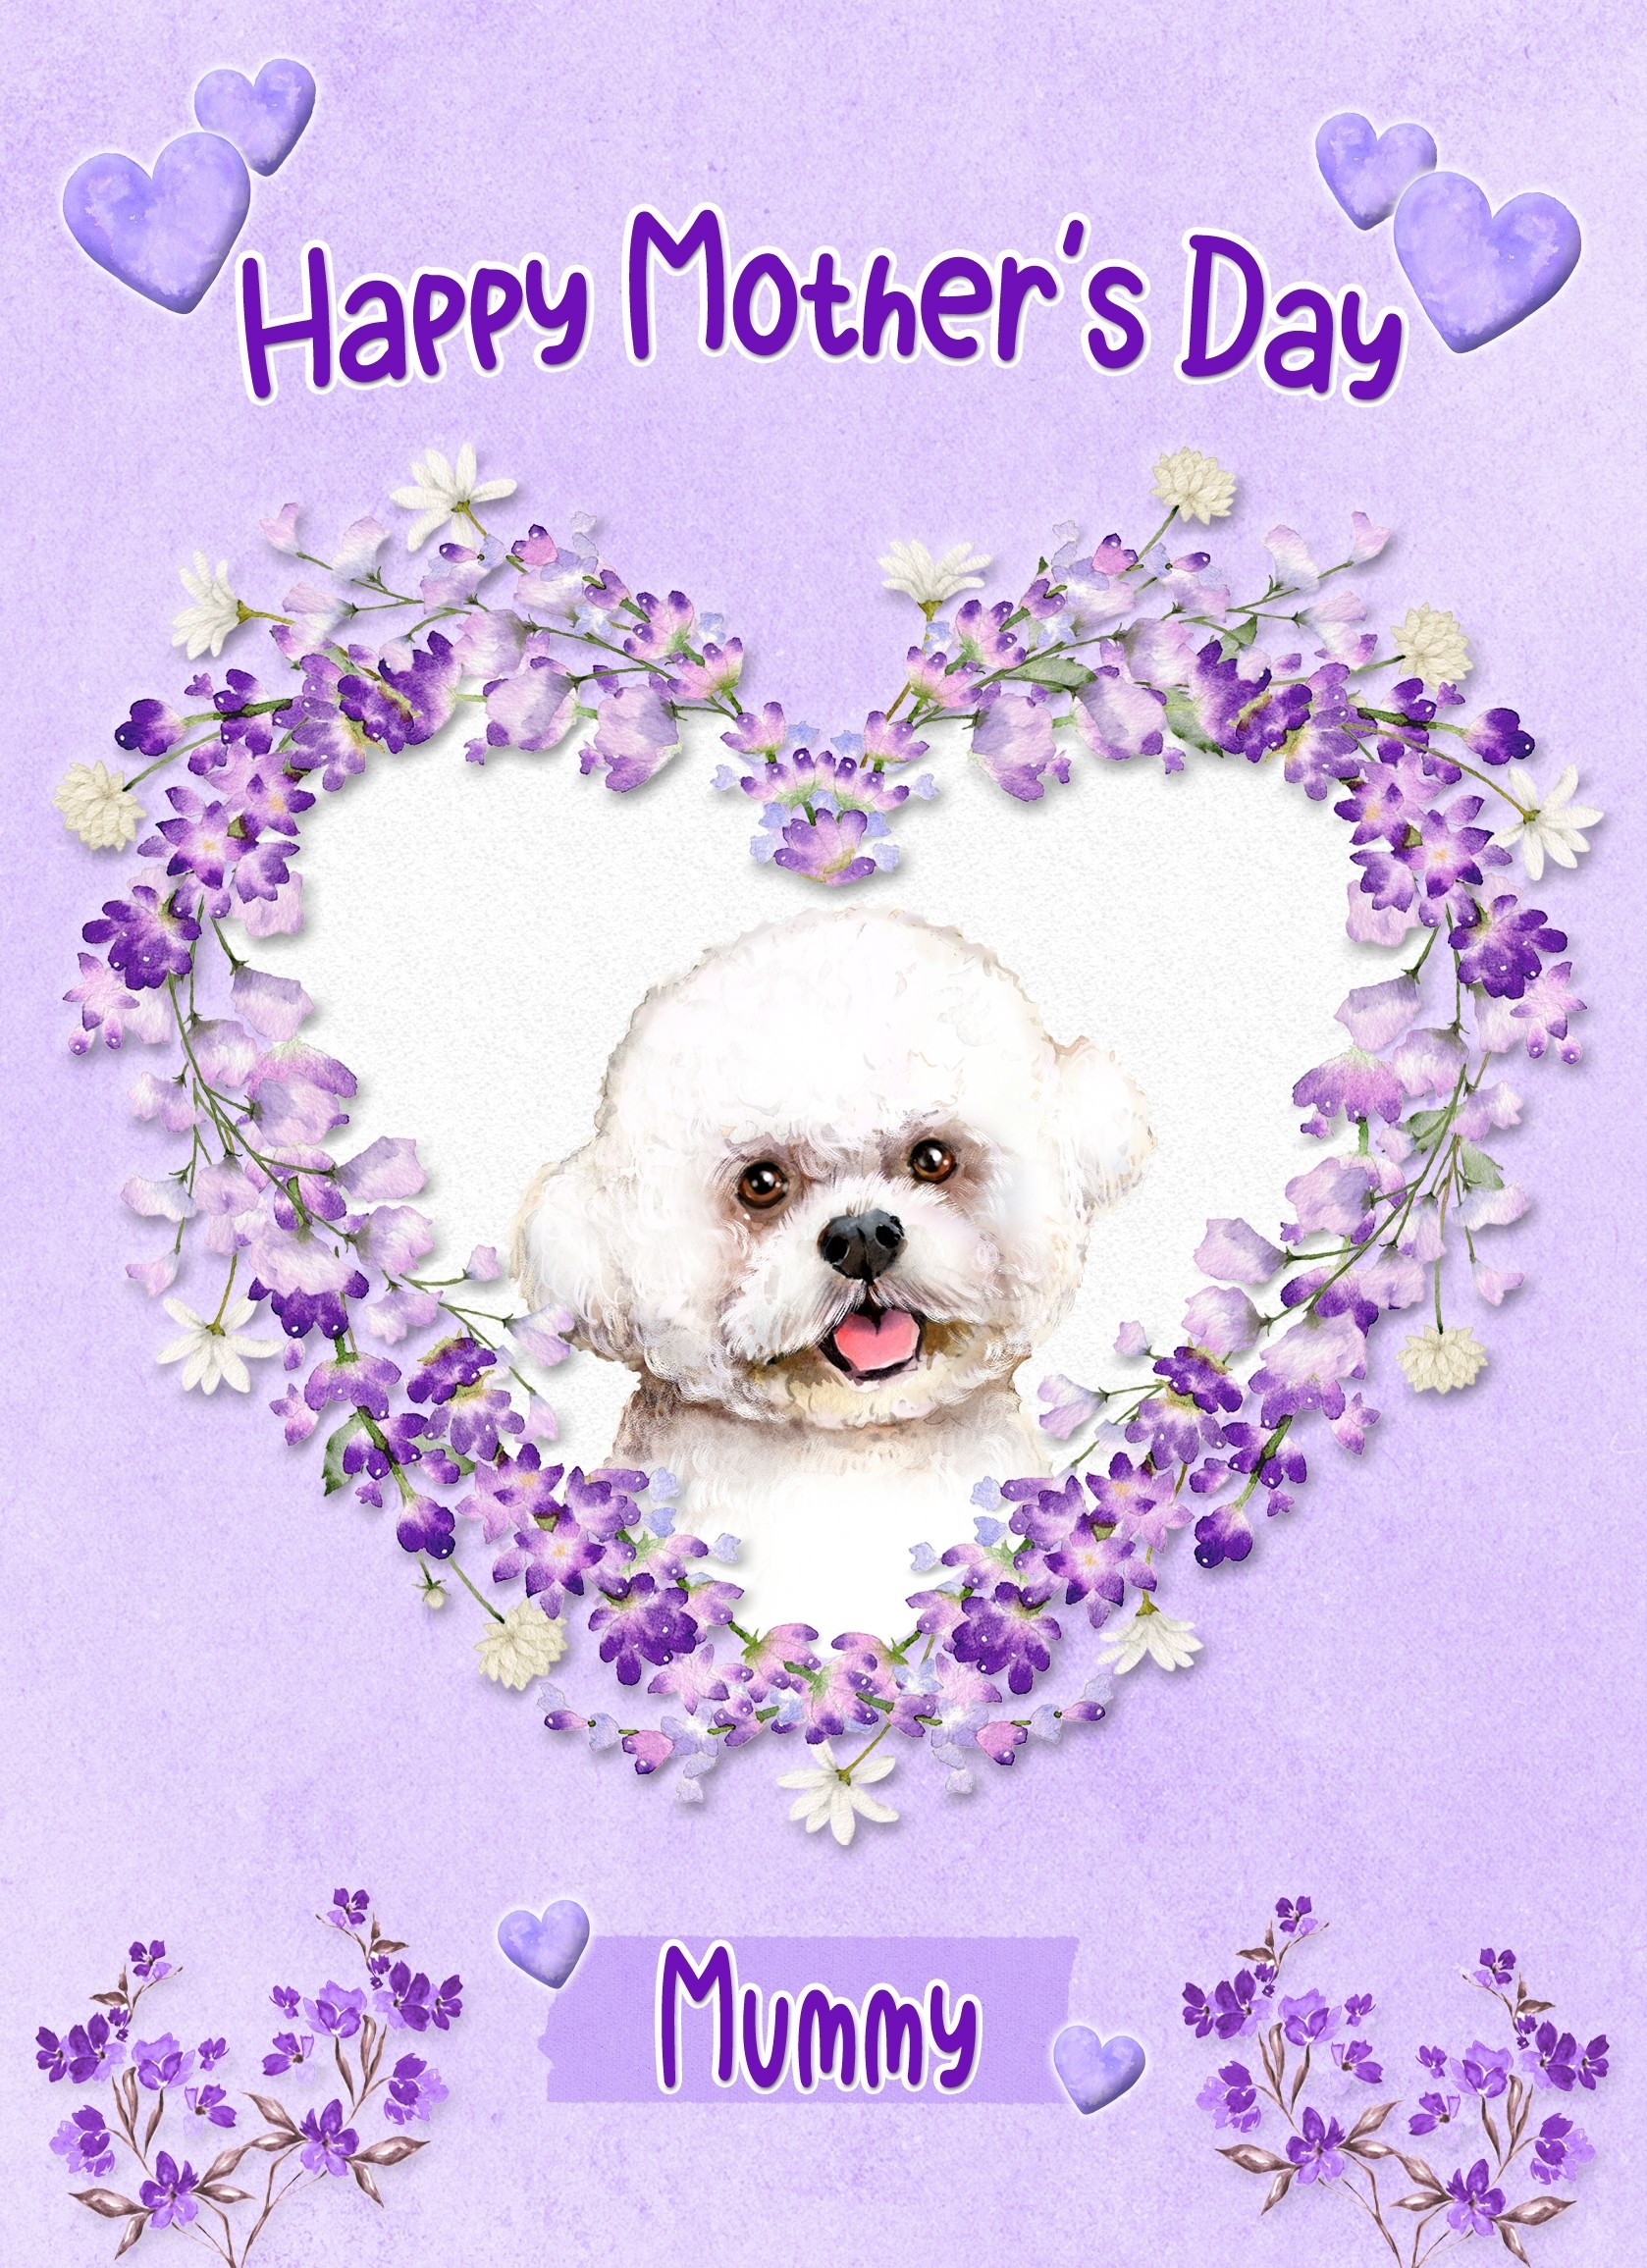 Bichon Frise Dog Mothers Day Card (Happy Mothers, Mummy)